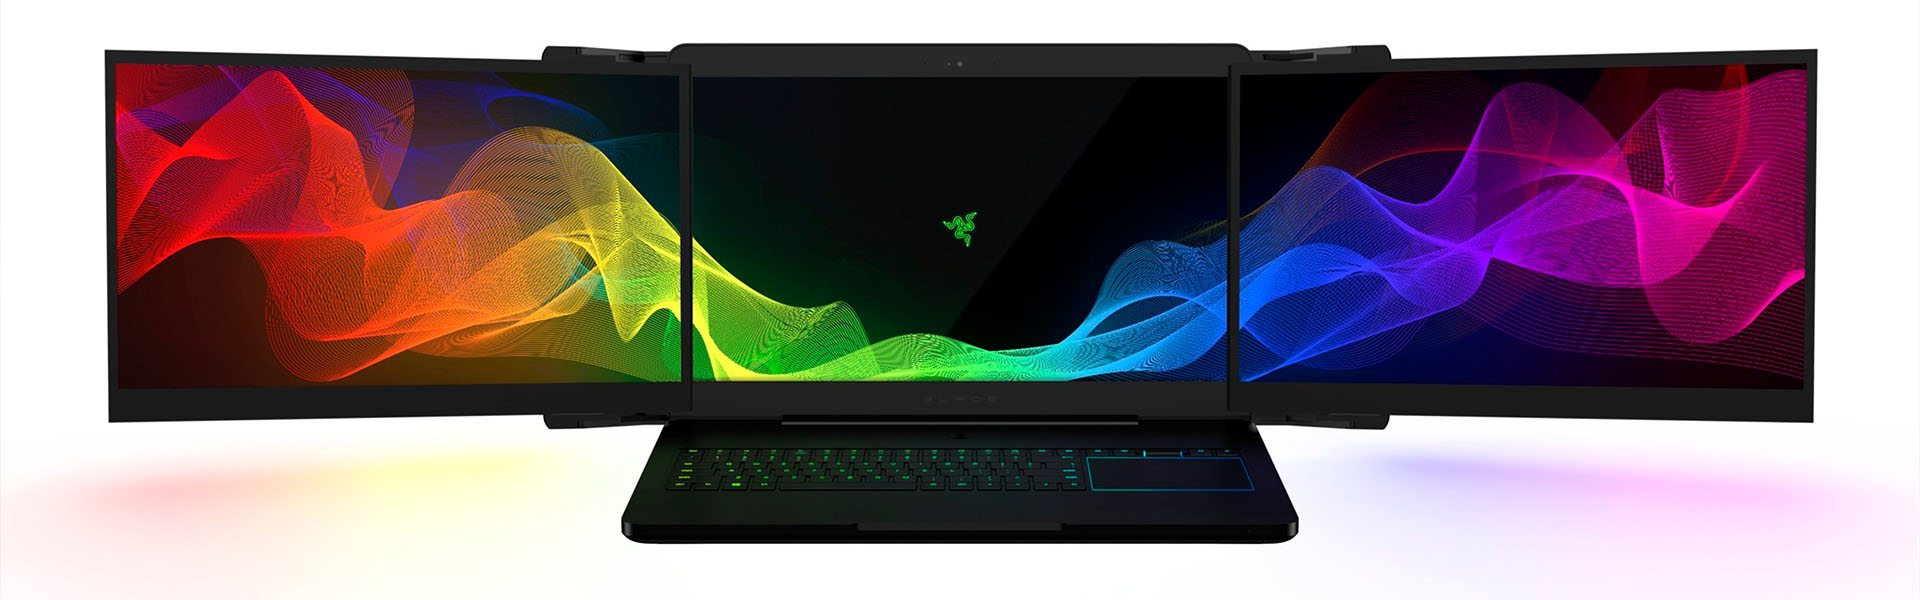 Razer Unveils Project Valerie: World's First Concept Design For Portable Multi-Monitor Immersive Gaming 13